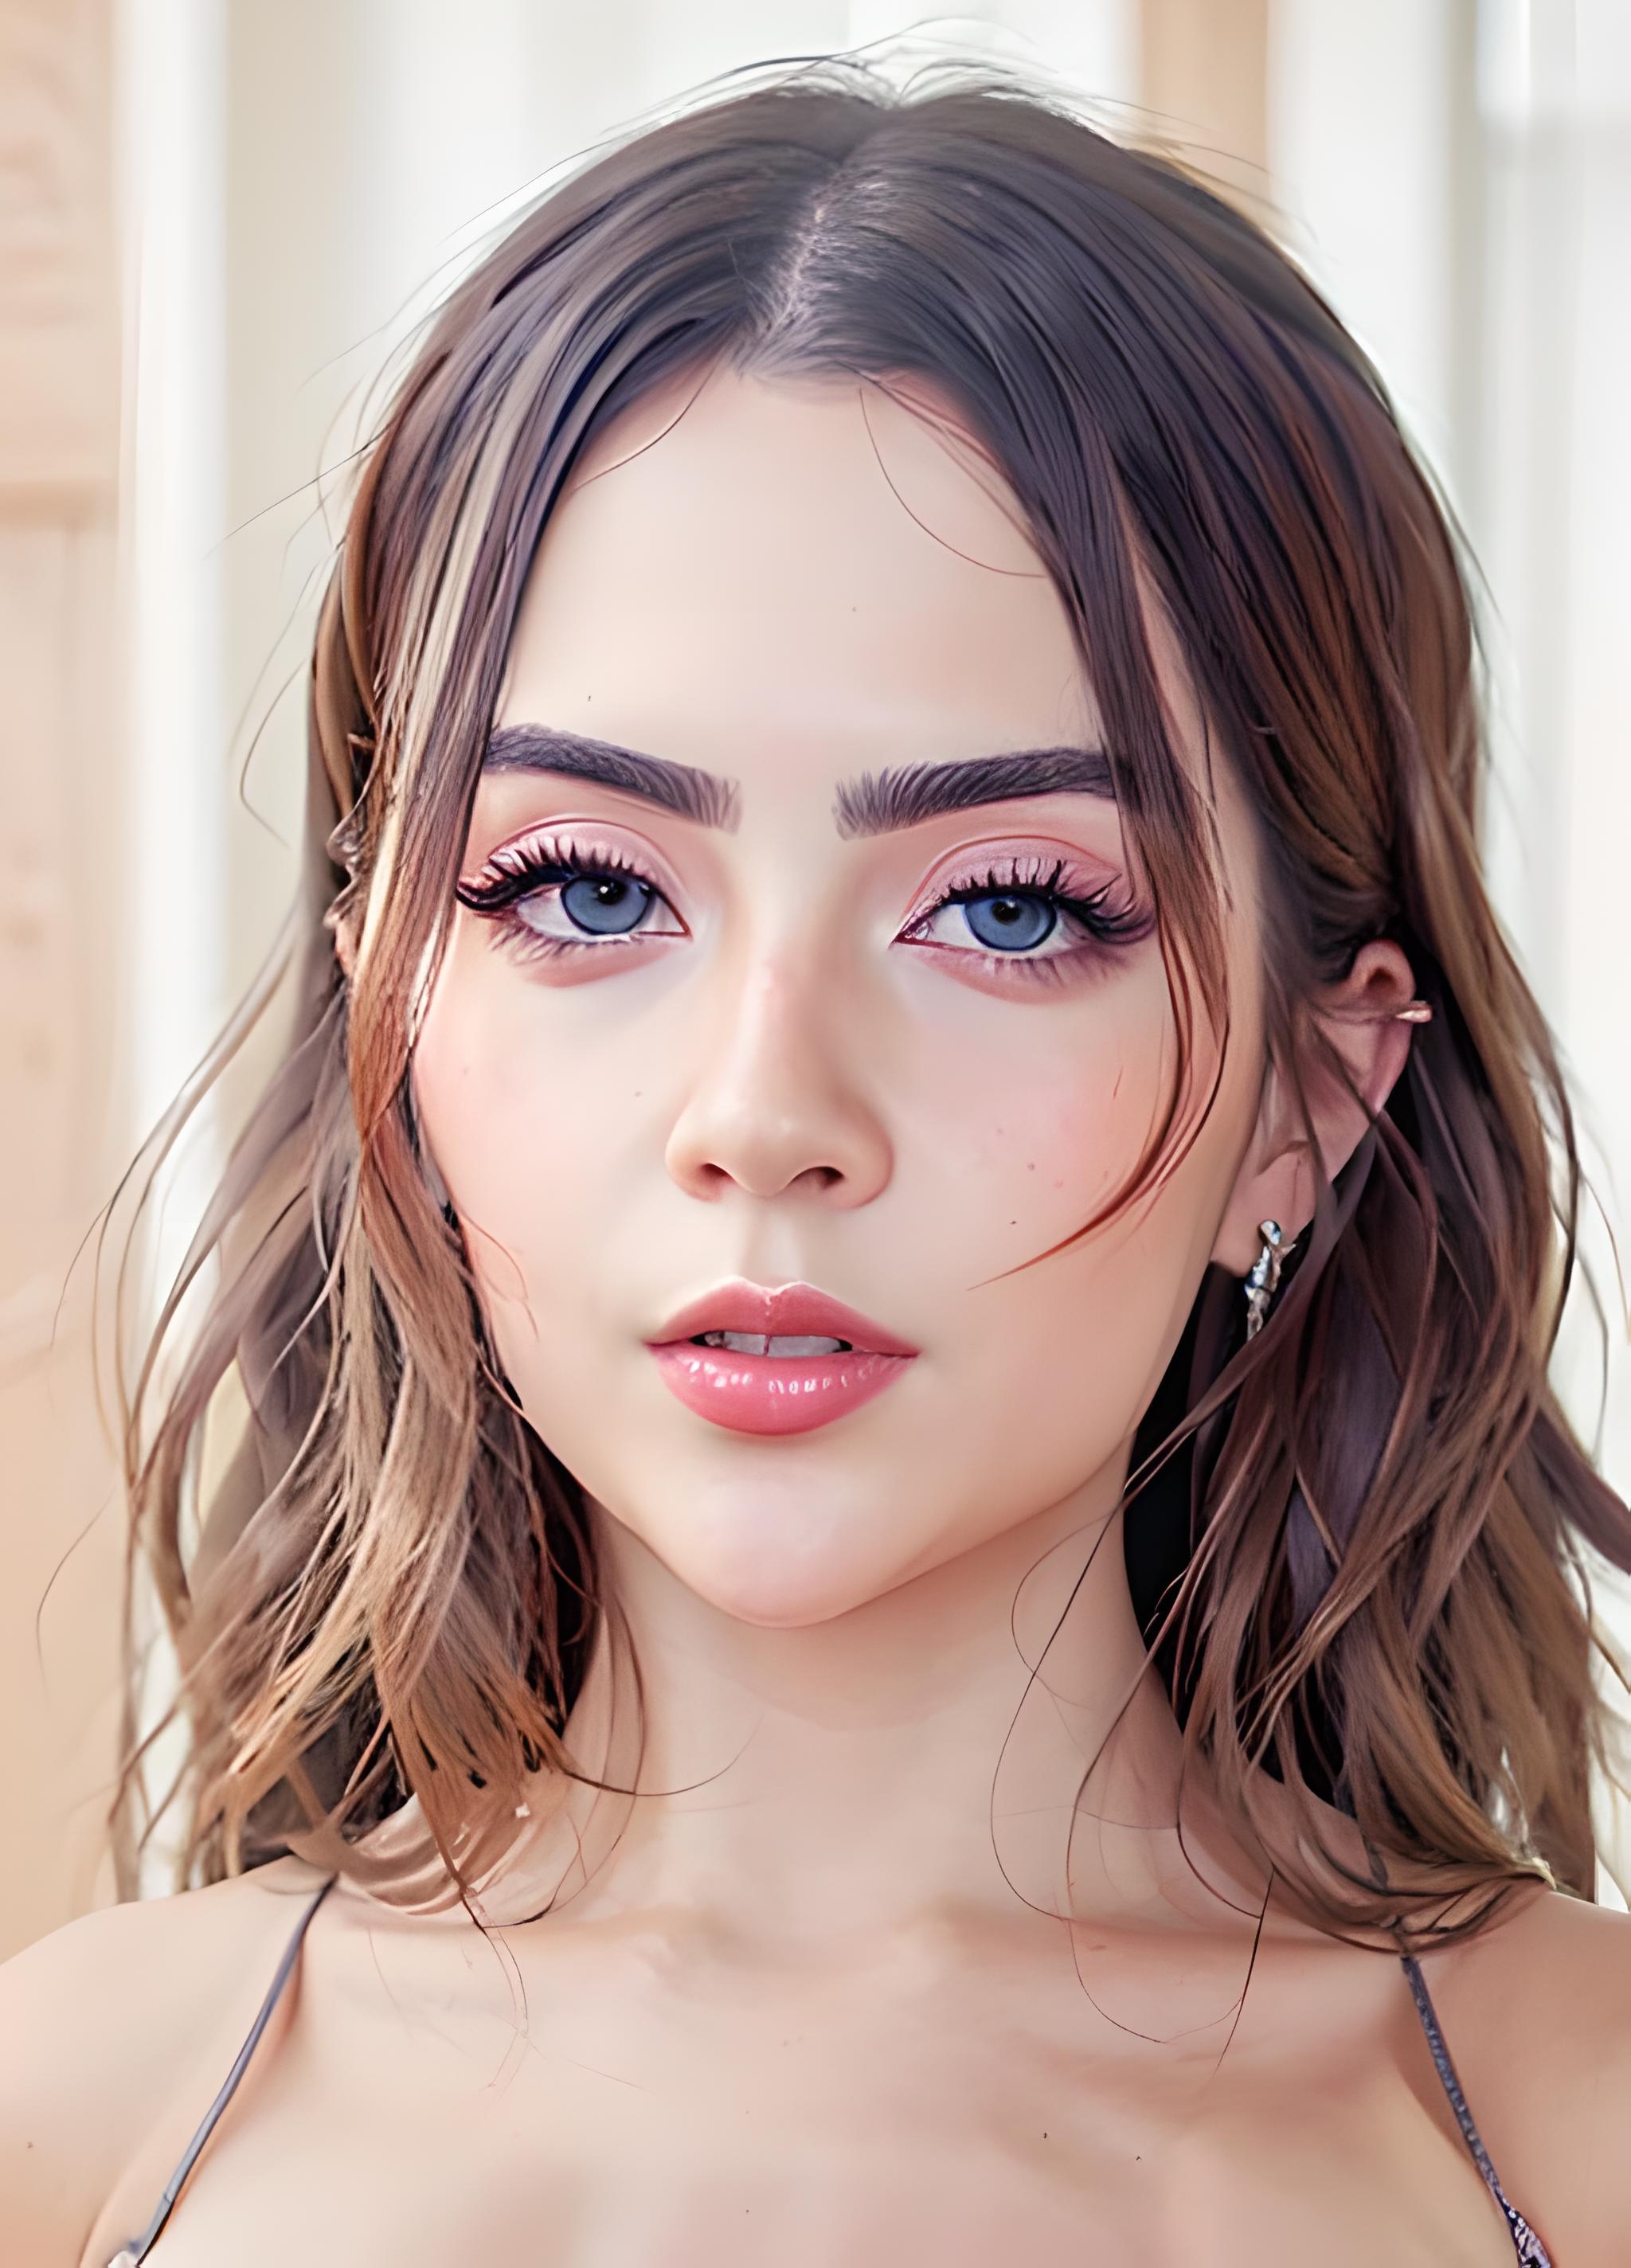 AI model image by wenderinf